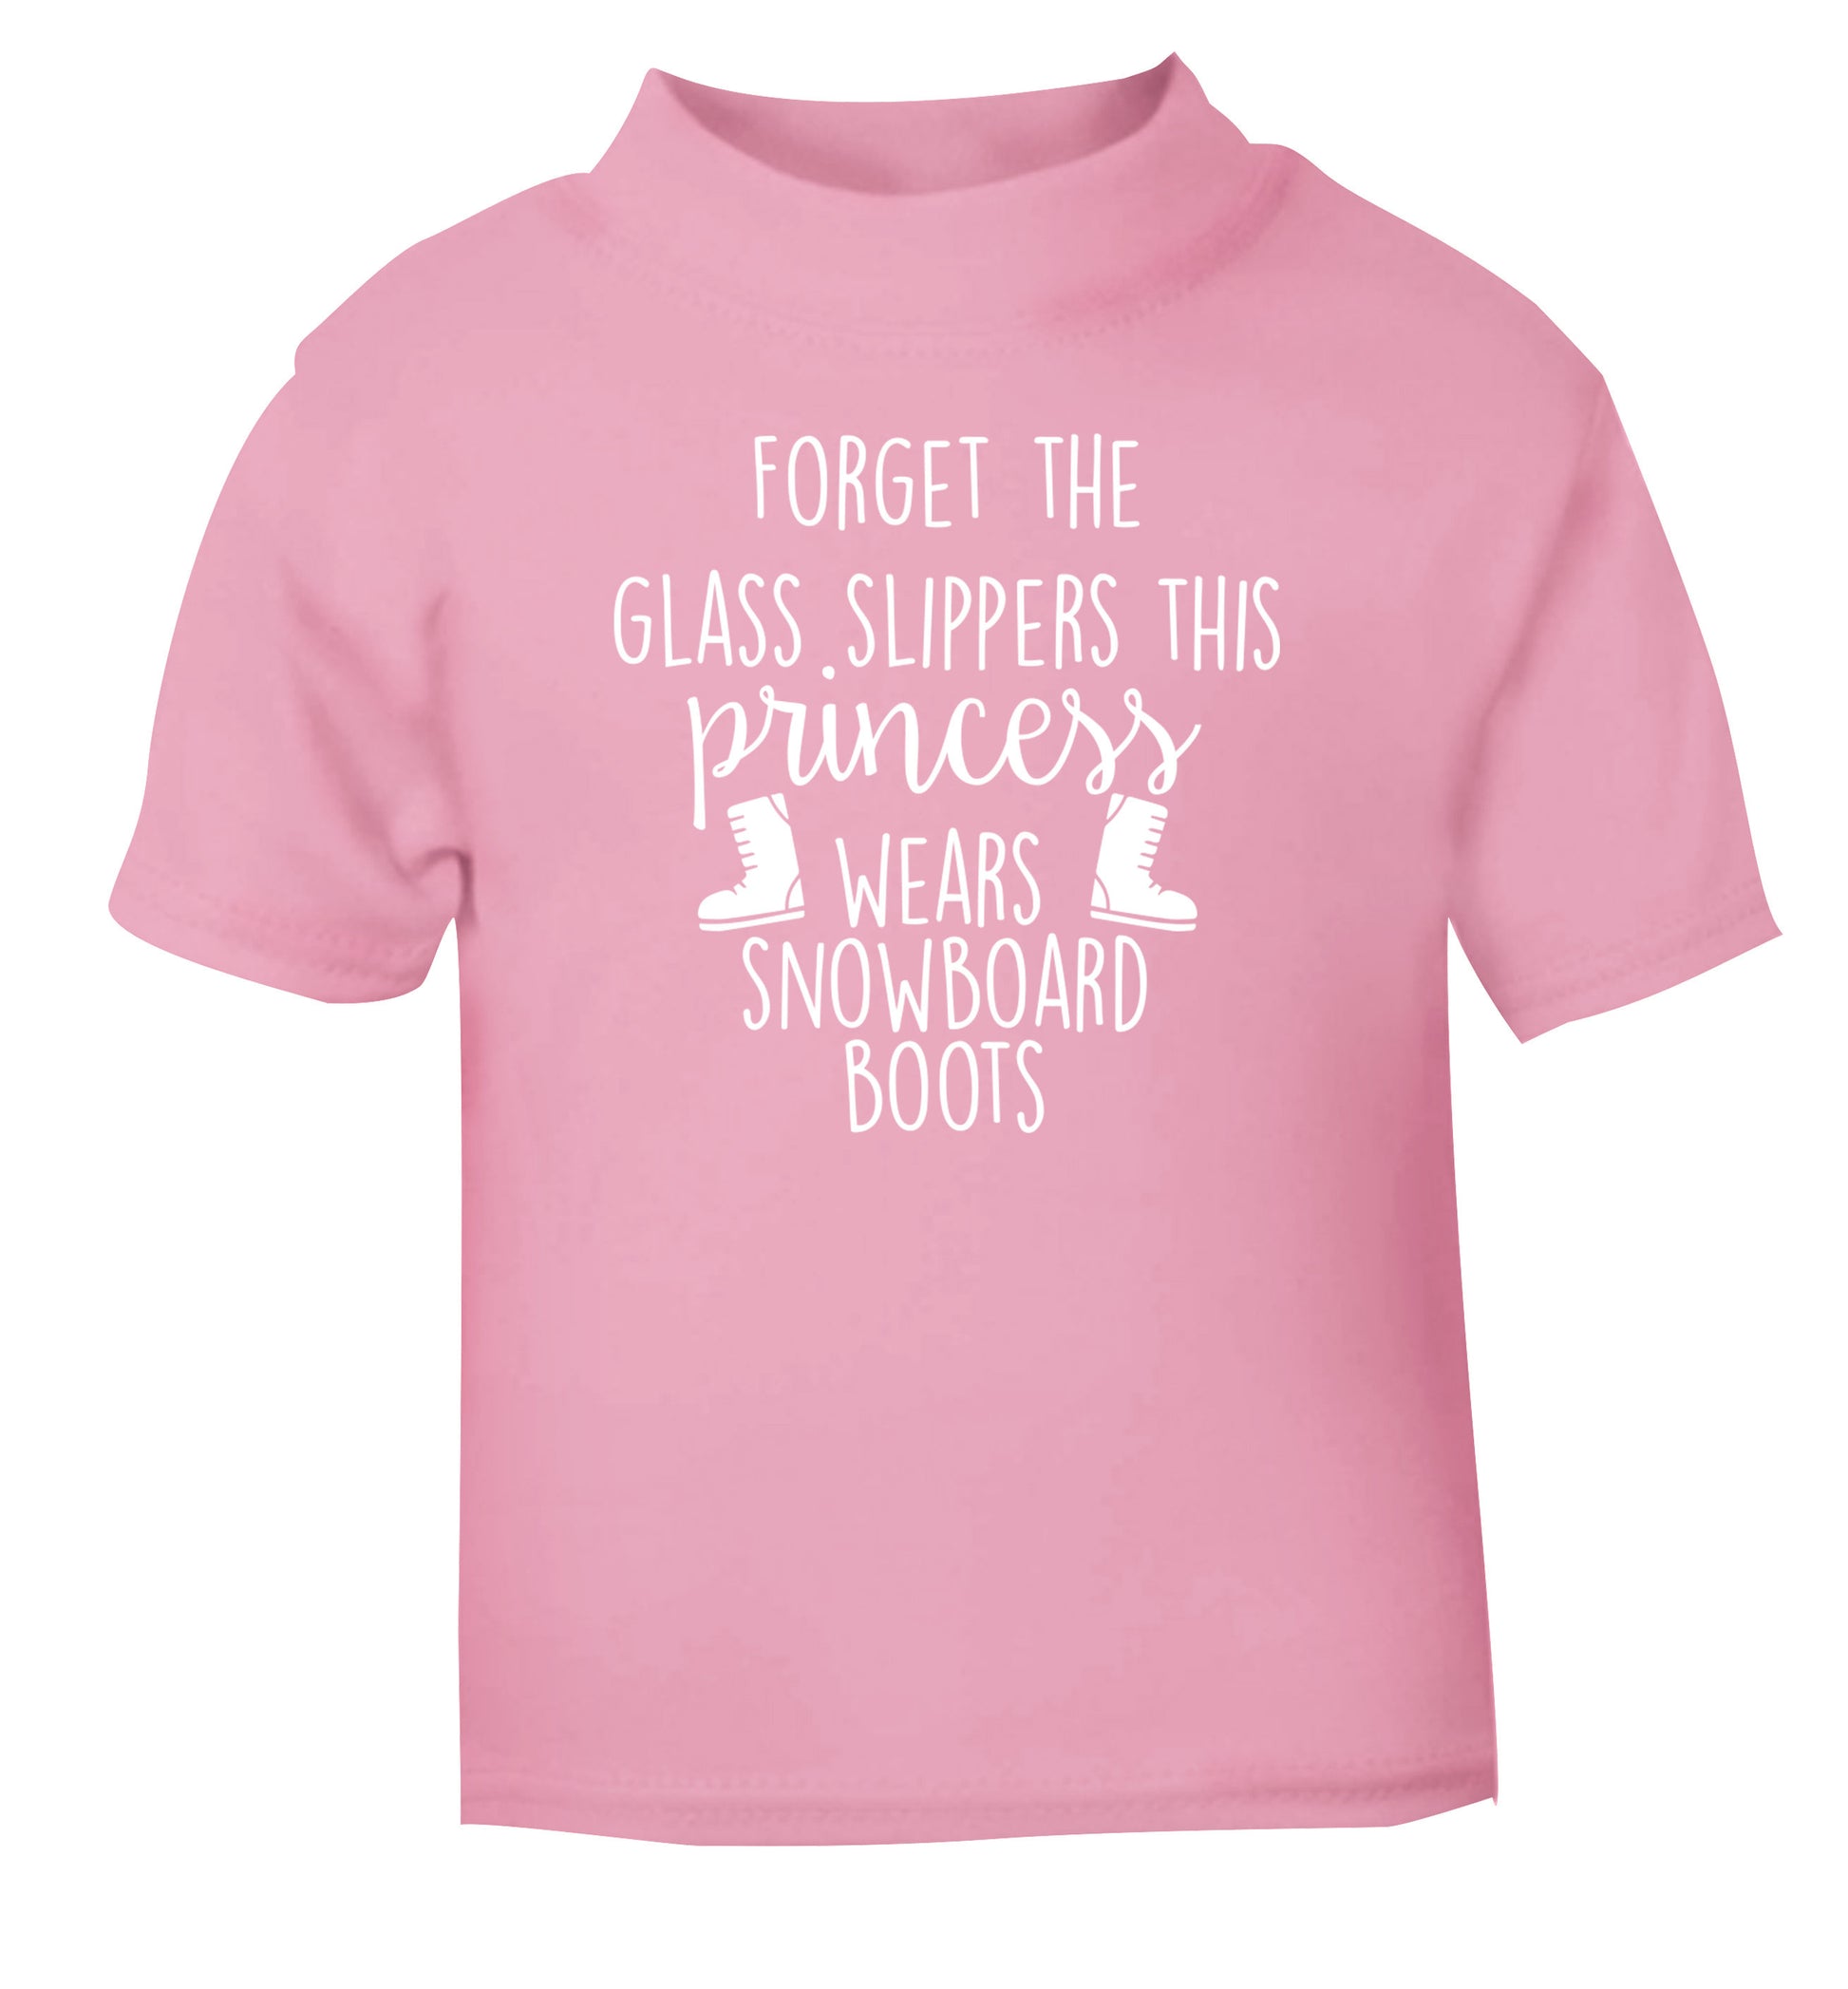 Forget the glass slippers this princess wears snowboard boots light pink Baby Toddler Tshirt 2 Years